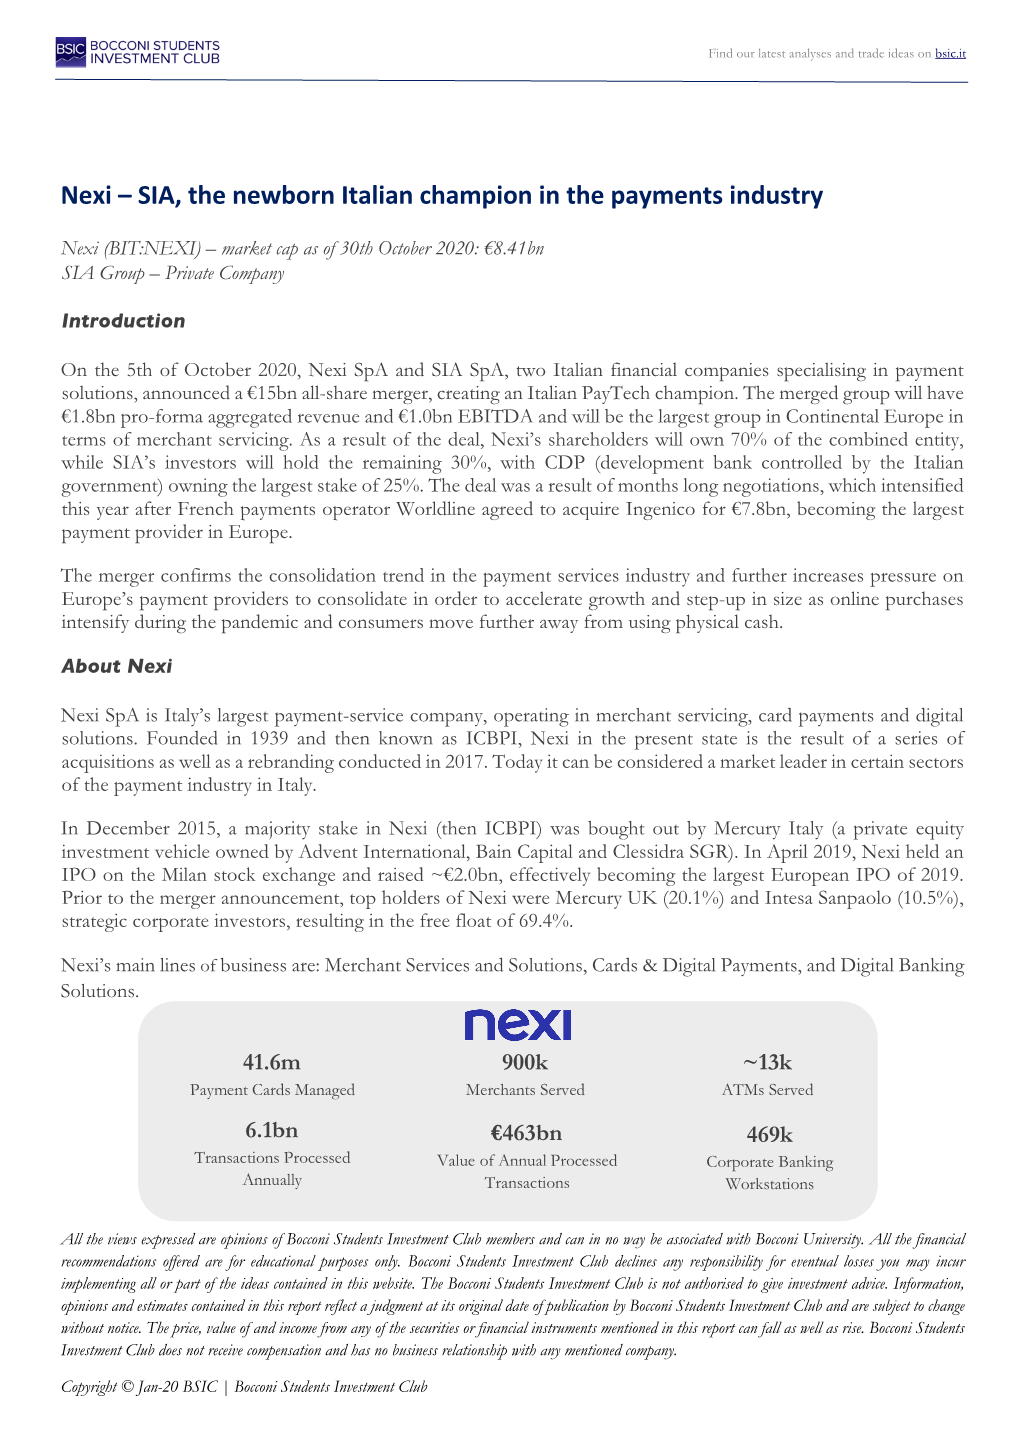 Nexi – SIA, the Newborn Italian Champion in the Payments Industry